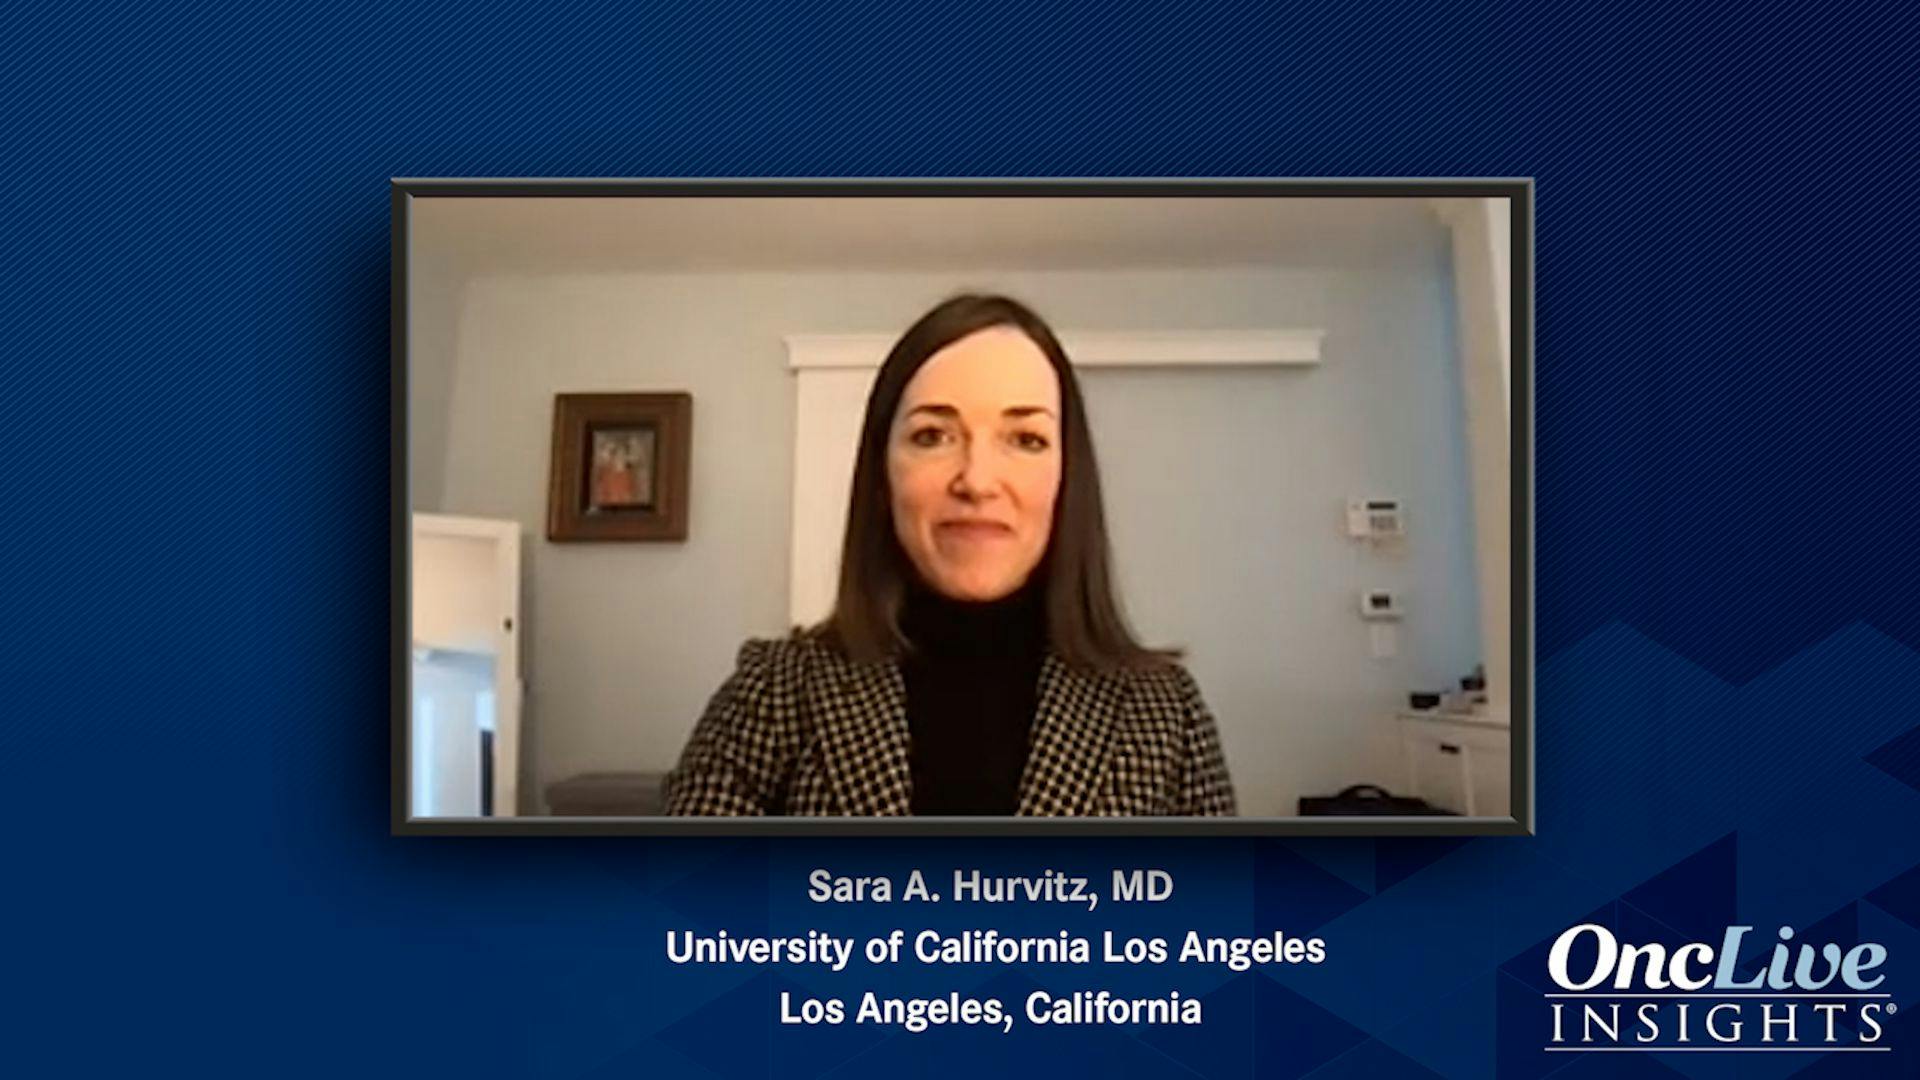 Sara A. Hurvitz, MD, an expert on breast cancer